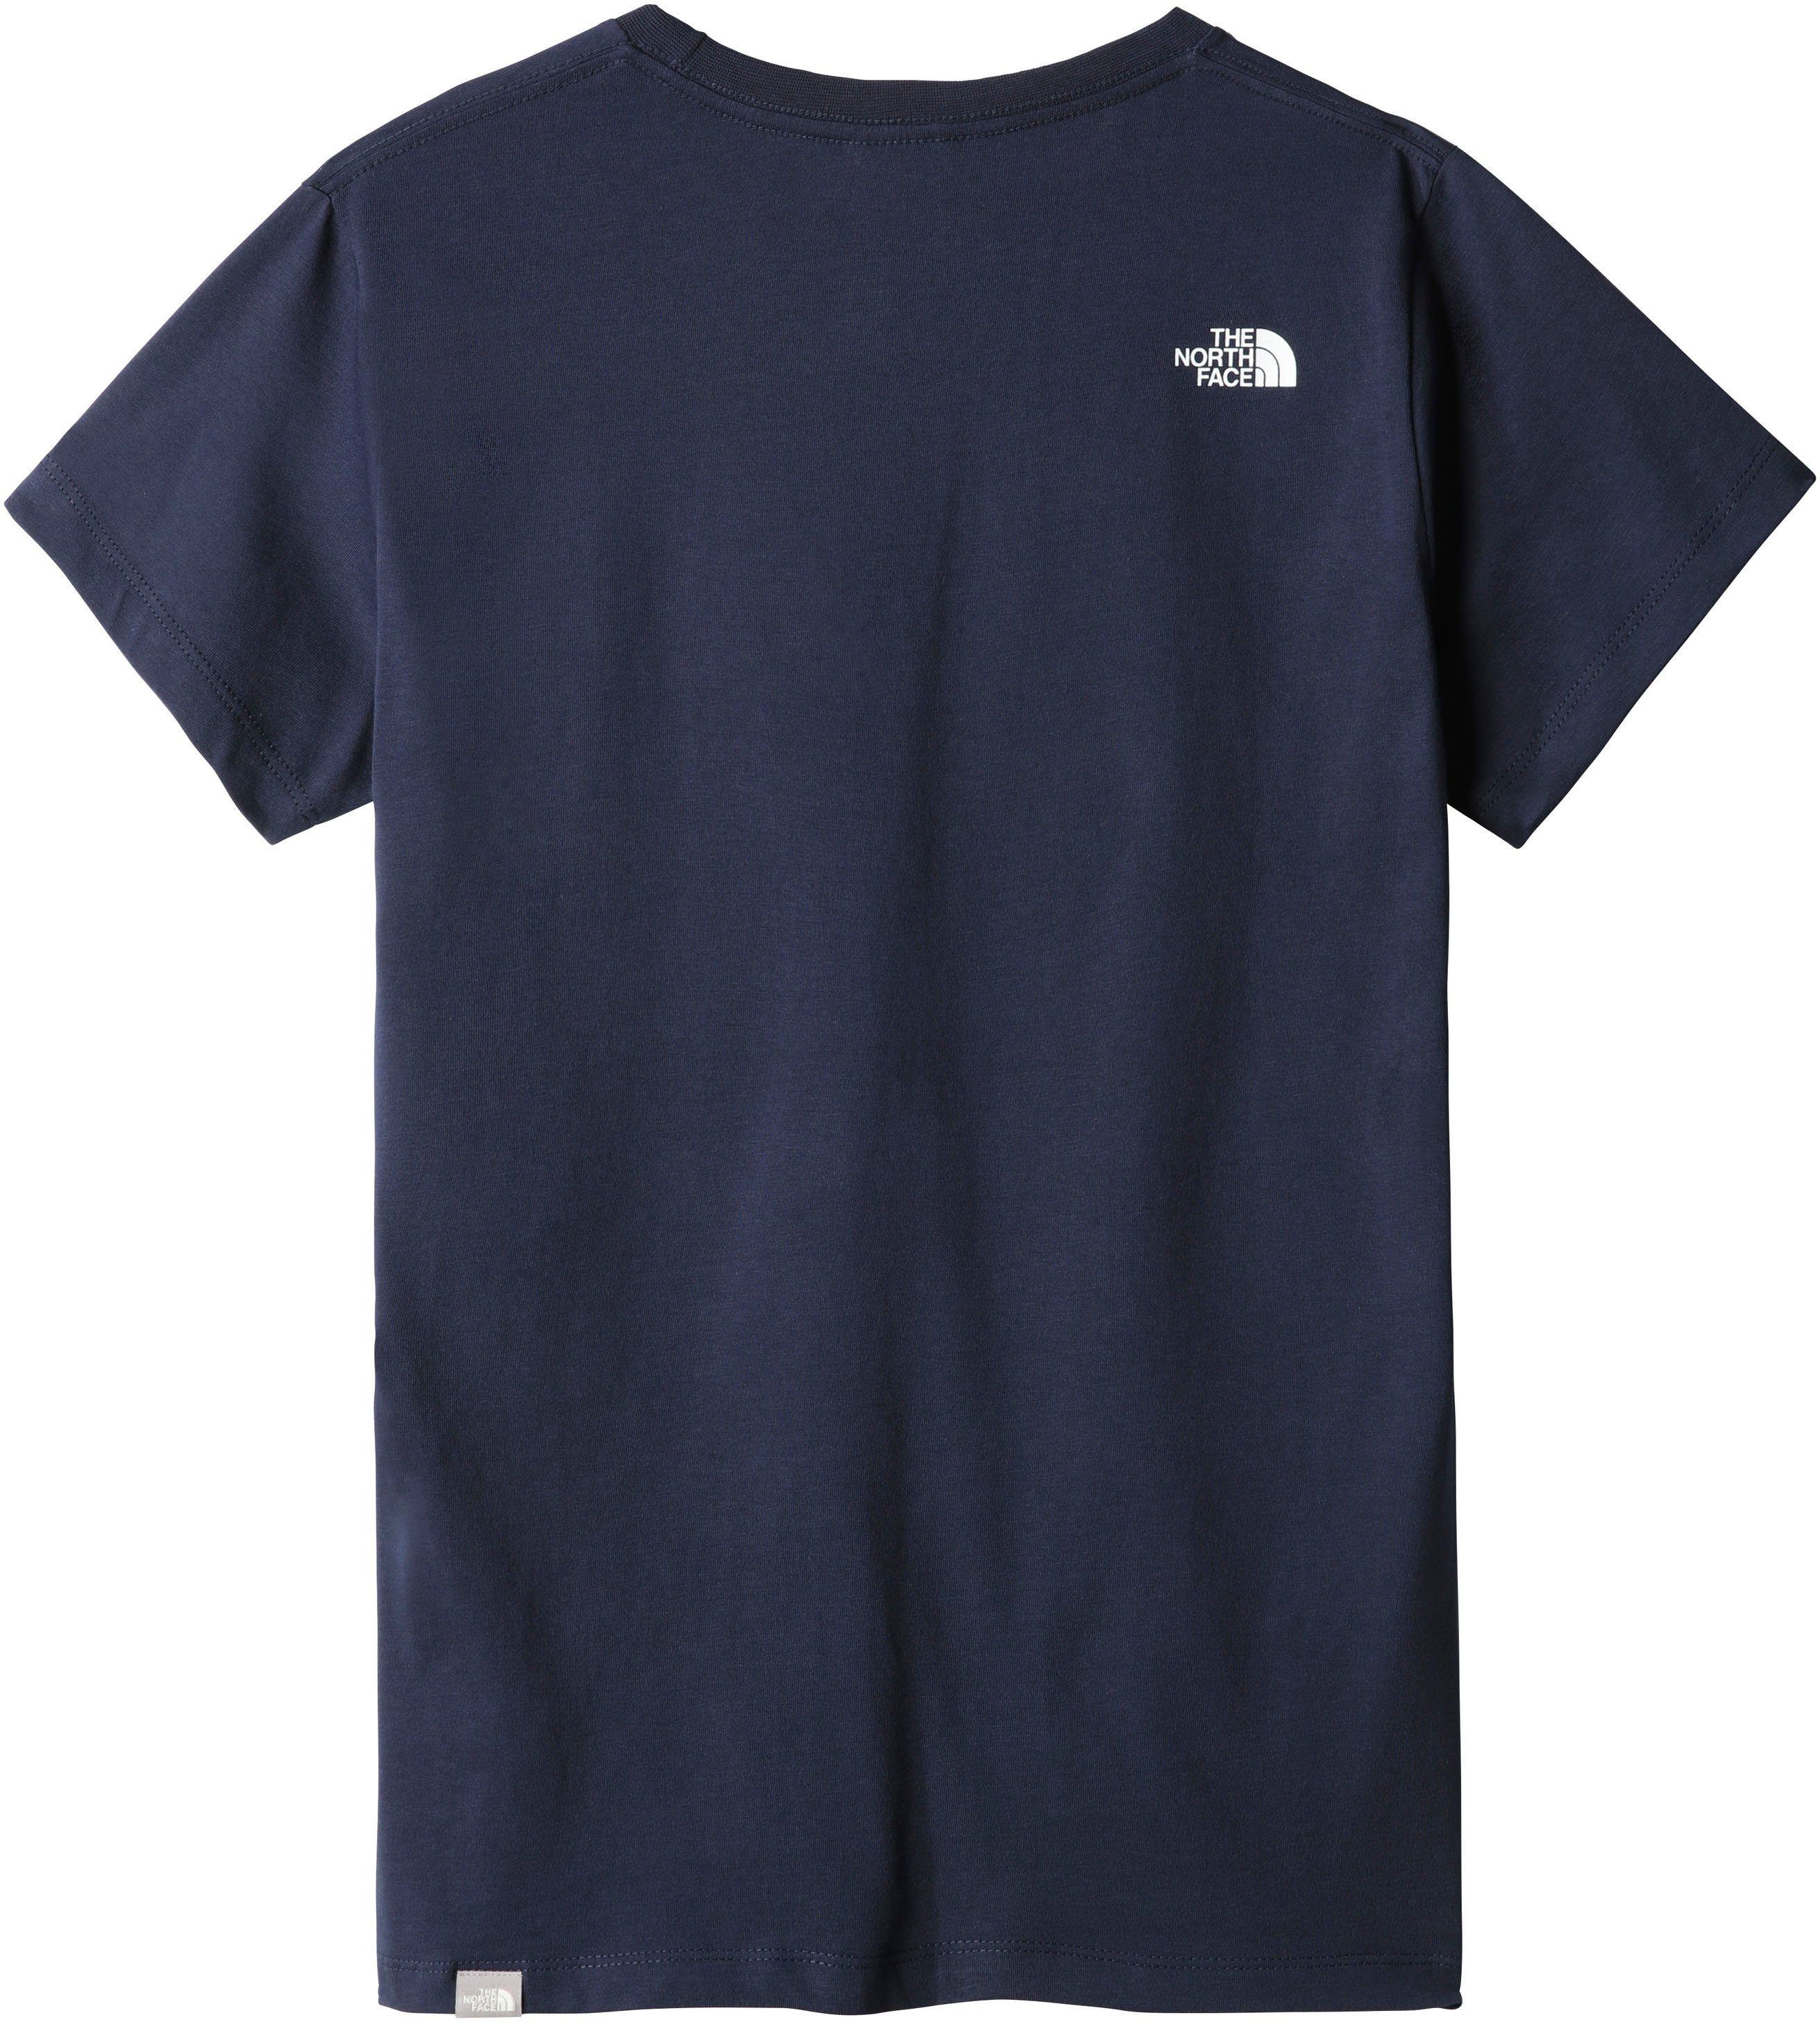 The North Face TEE SIMPLE T-Shirt DOME Logodruck mit blue